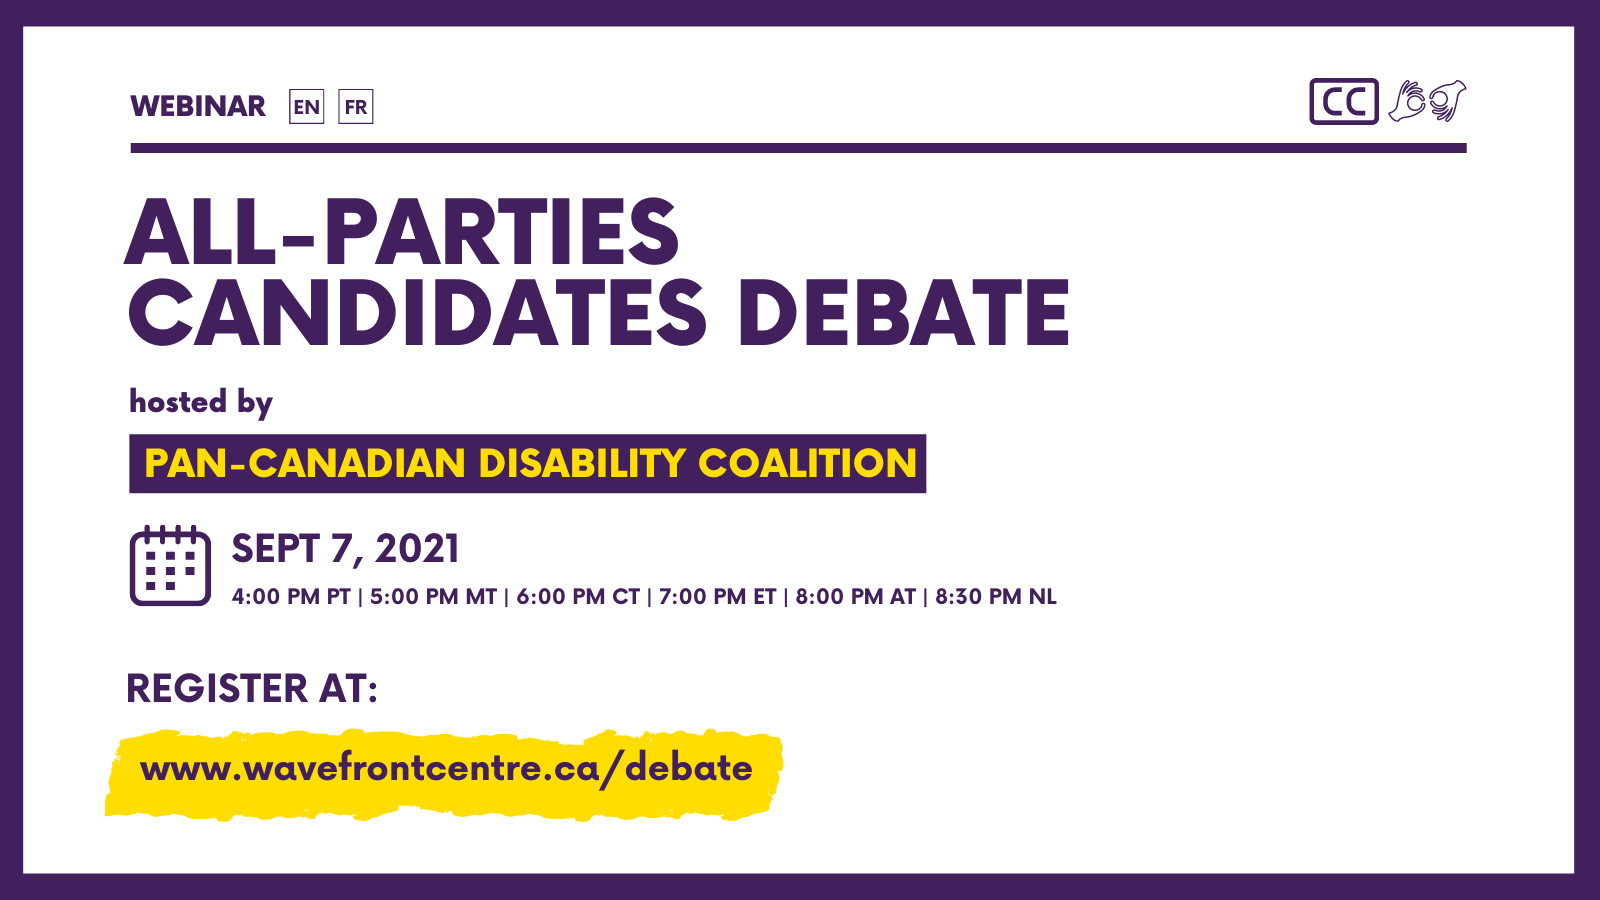 Image description: A purple, white and yellow wallpaper illustration. Text: All Parties Candidates Debate. Hosted by Pan Canadian Disability Coalition. September 7, 2021. 4:00 PM PT | 5:00 PM MT | 6:00 PM CT | 7:00 PM ET | 8:00 PM AT | 8:30 PM NL. Register at www.wavefrontcentre.ca/debate 